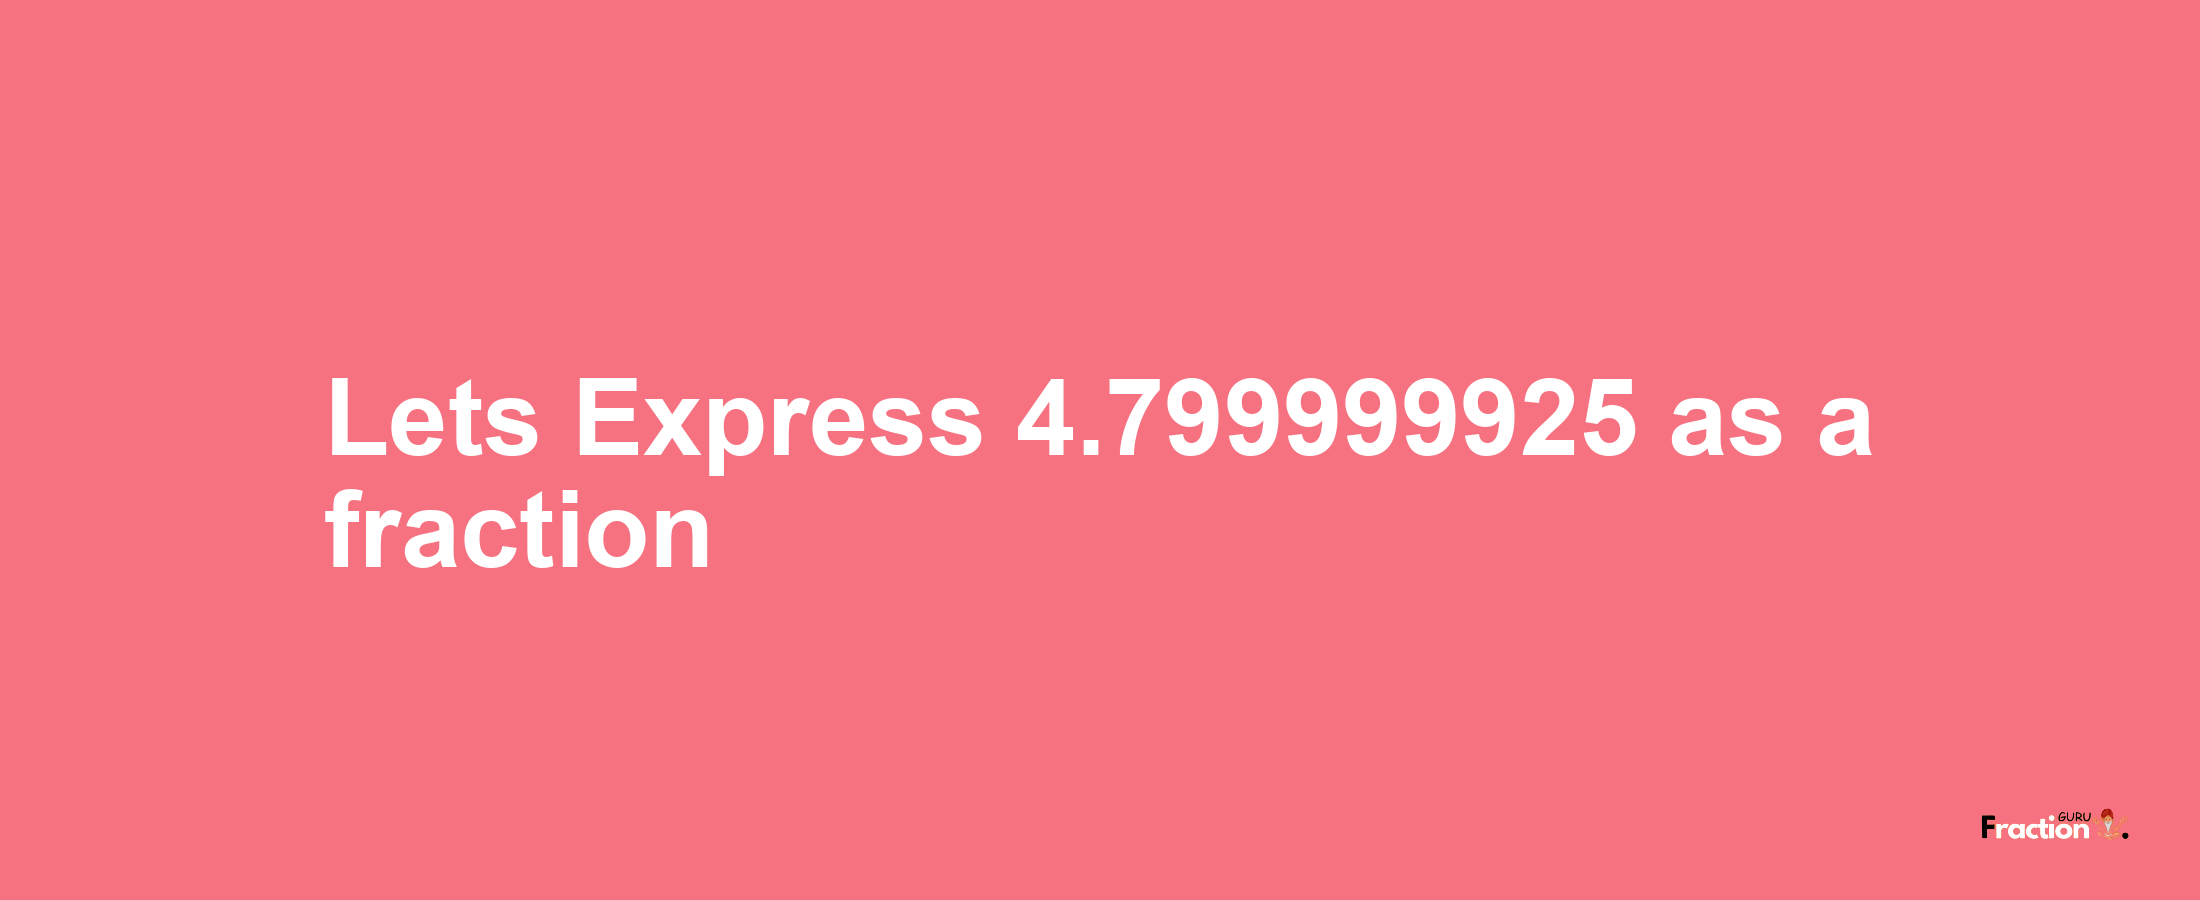 Lets Express 4.799999925 as afraction